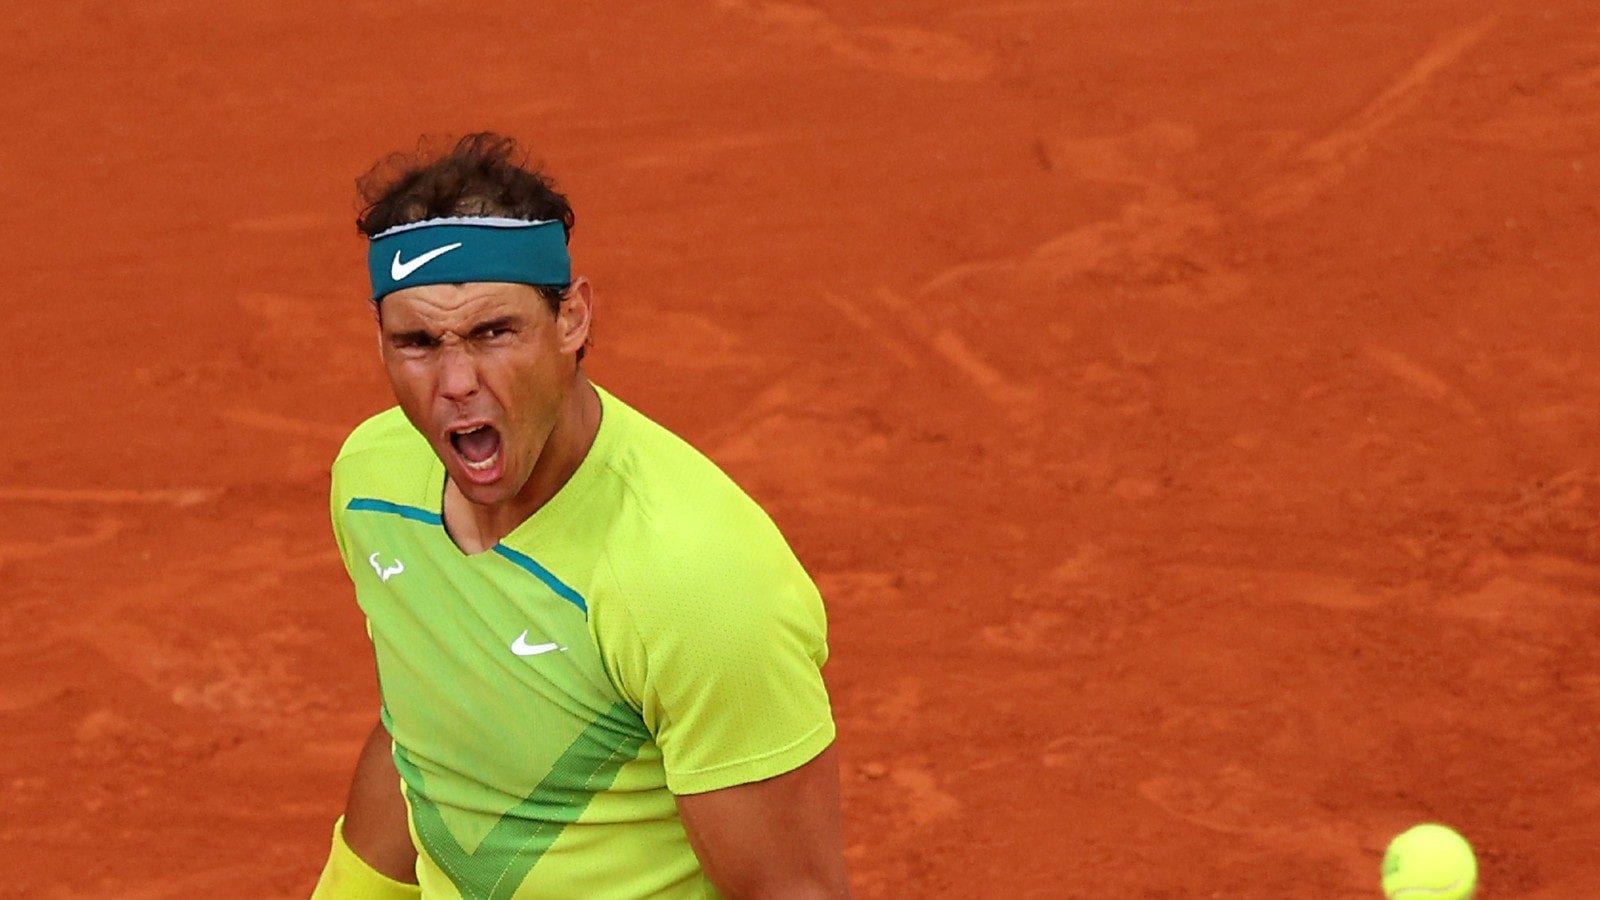 French Open 2022 Final Rafael Nadal vs Casper Ruud Live Streaming - When and Where to Watch Roland Garros